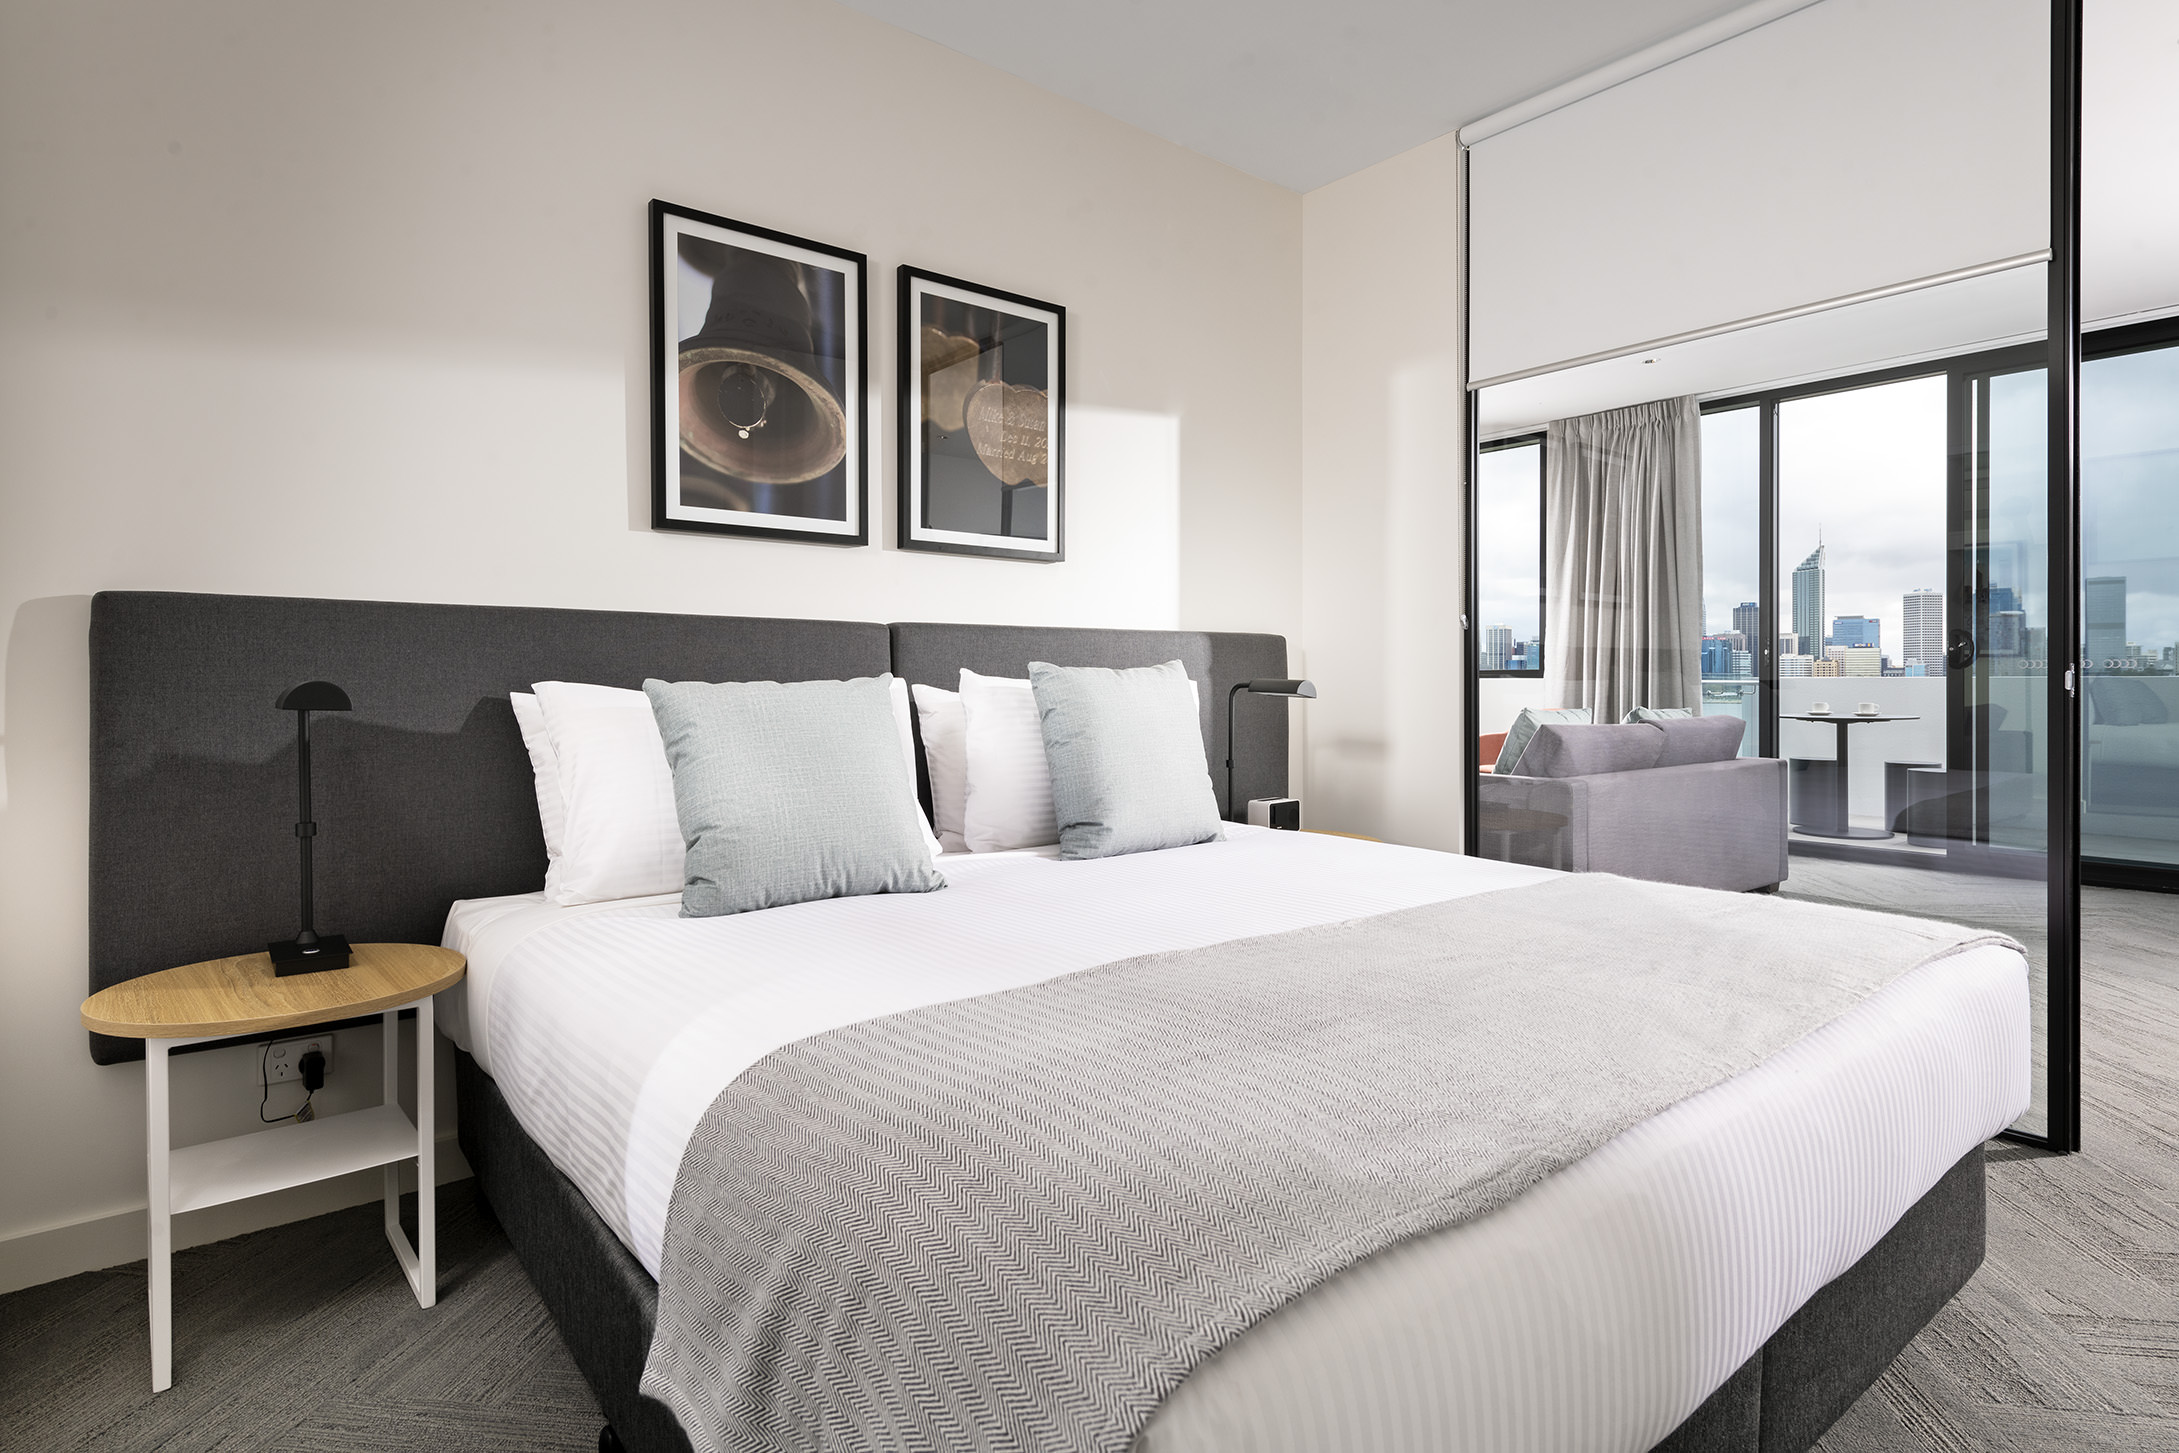 Quest South Perth Foreshore Image Gallery Quest Apartment